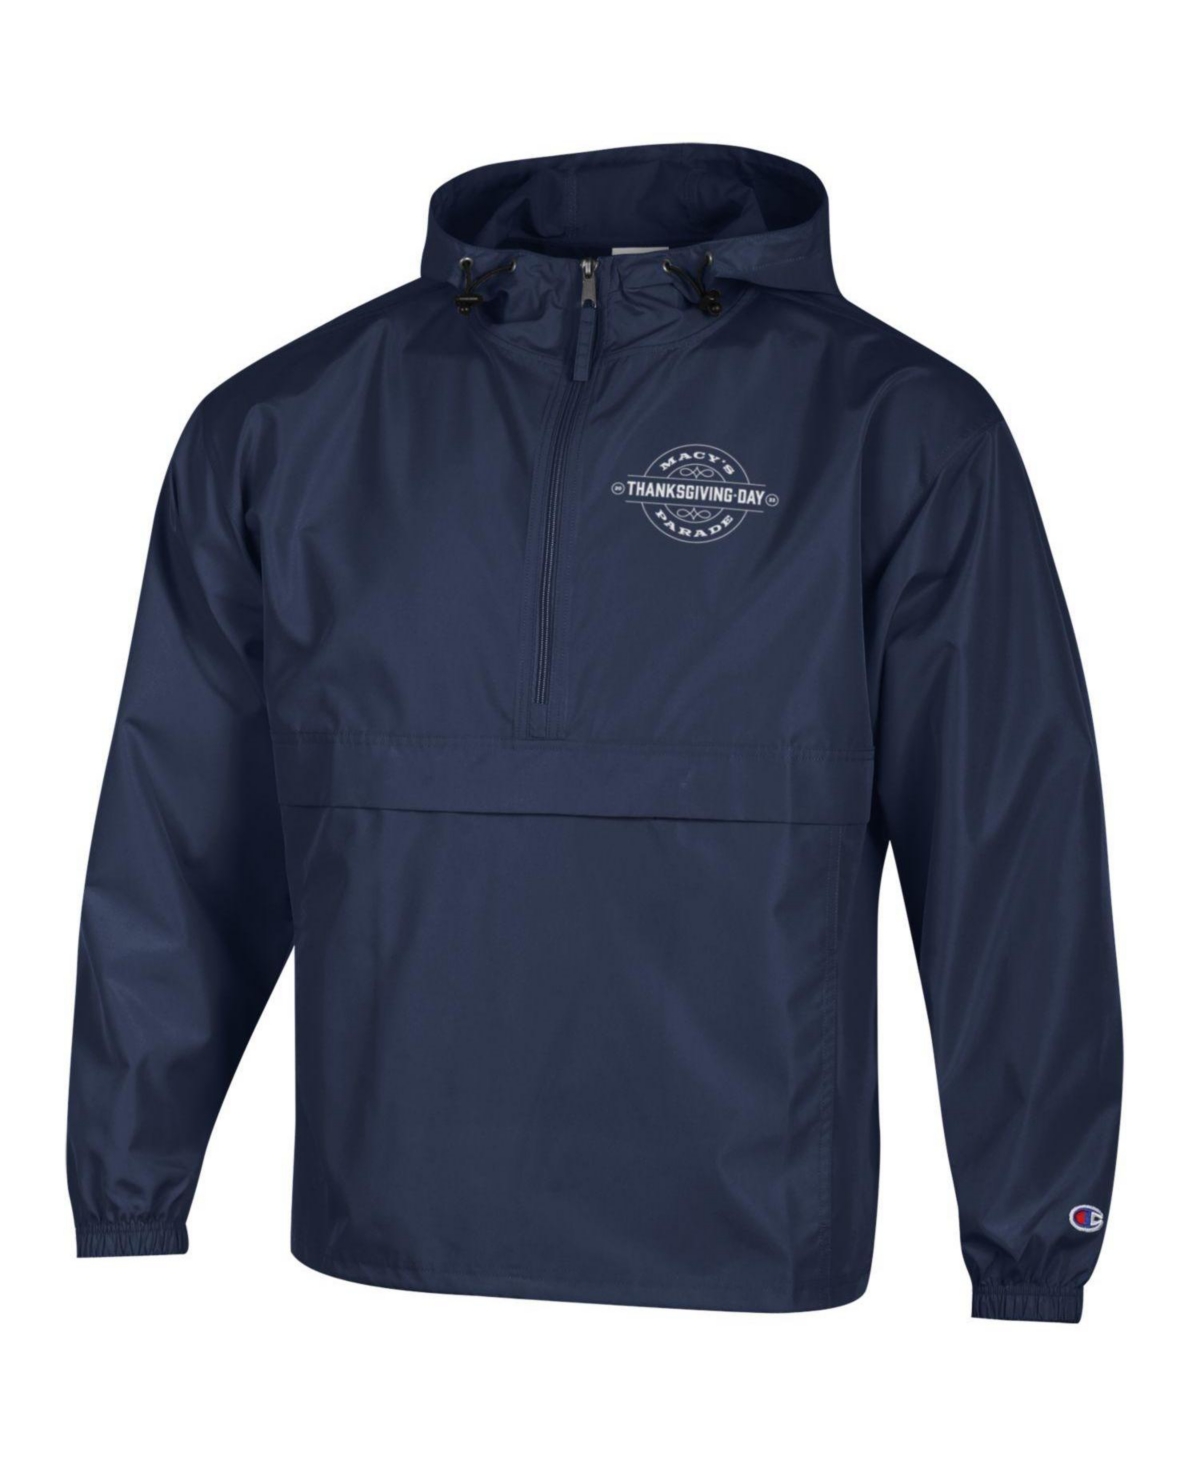 Macy's Champion Packable Jacket In Marine Navy